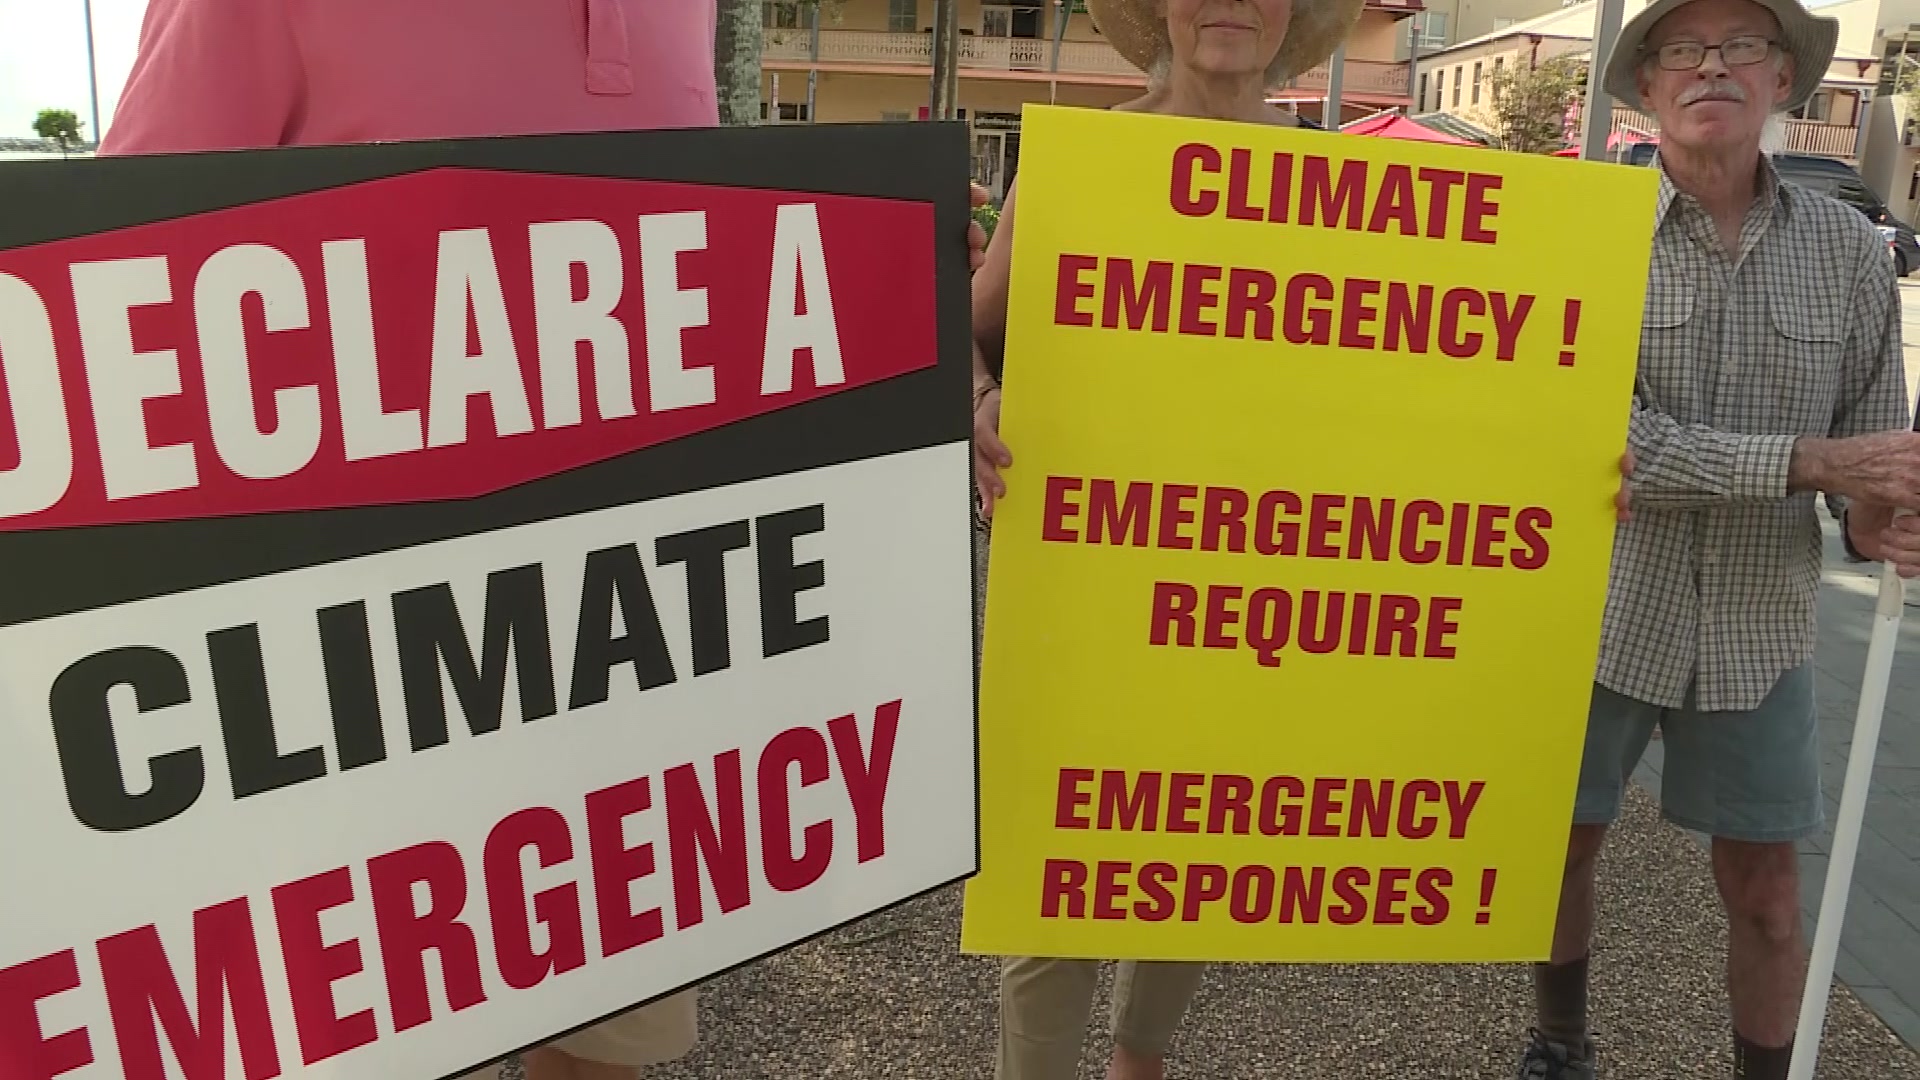 The “climate emergency” and the race to ‘Net-Zero’ by 2030